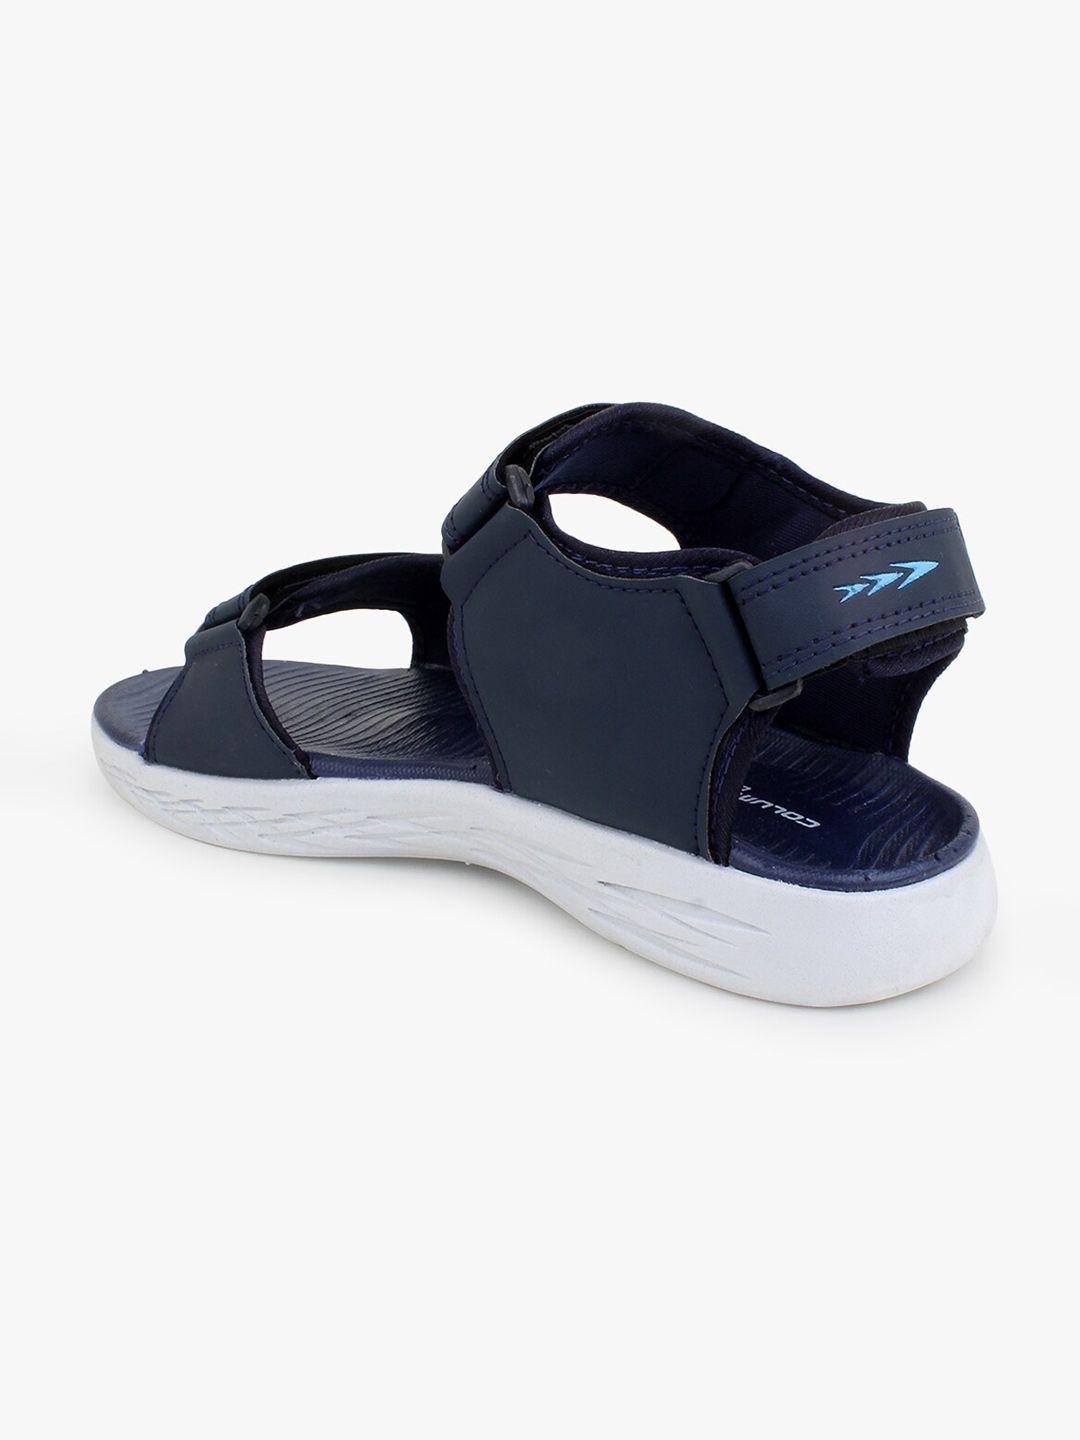 columbus-men-navy-blue-solid-synthetic-sports-sandals